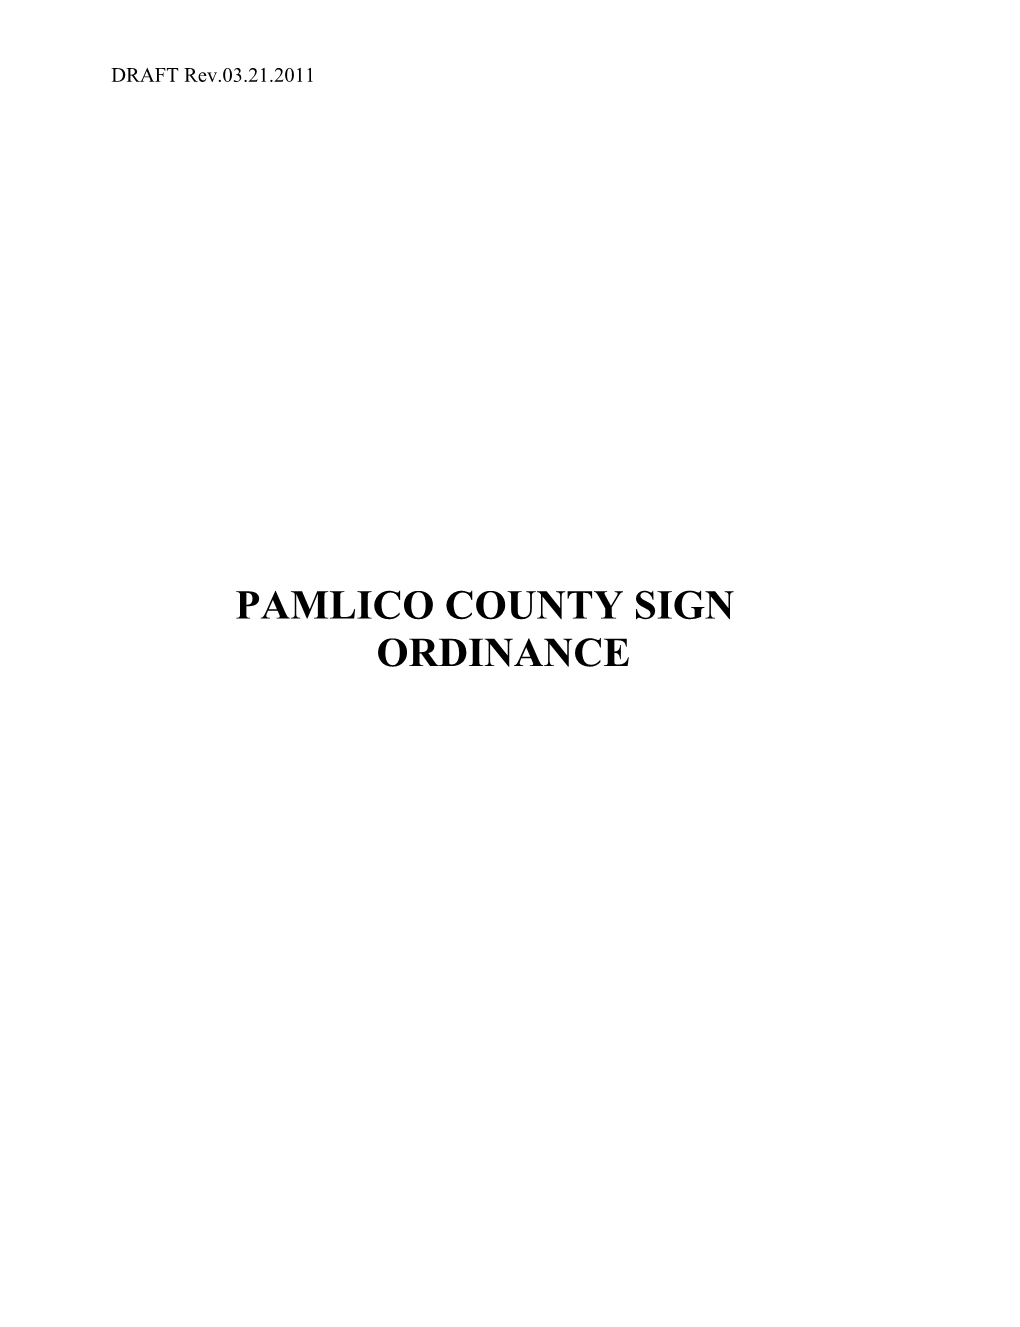 PAMLICOCOUNTY SIGN Ordinancetable of Contents